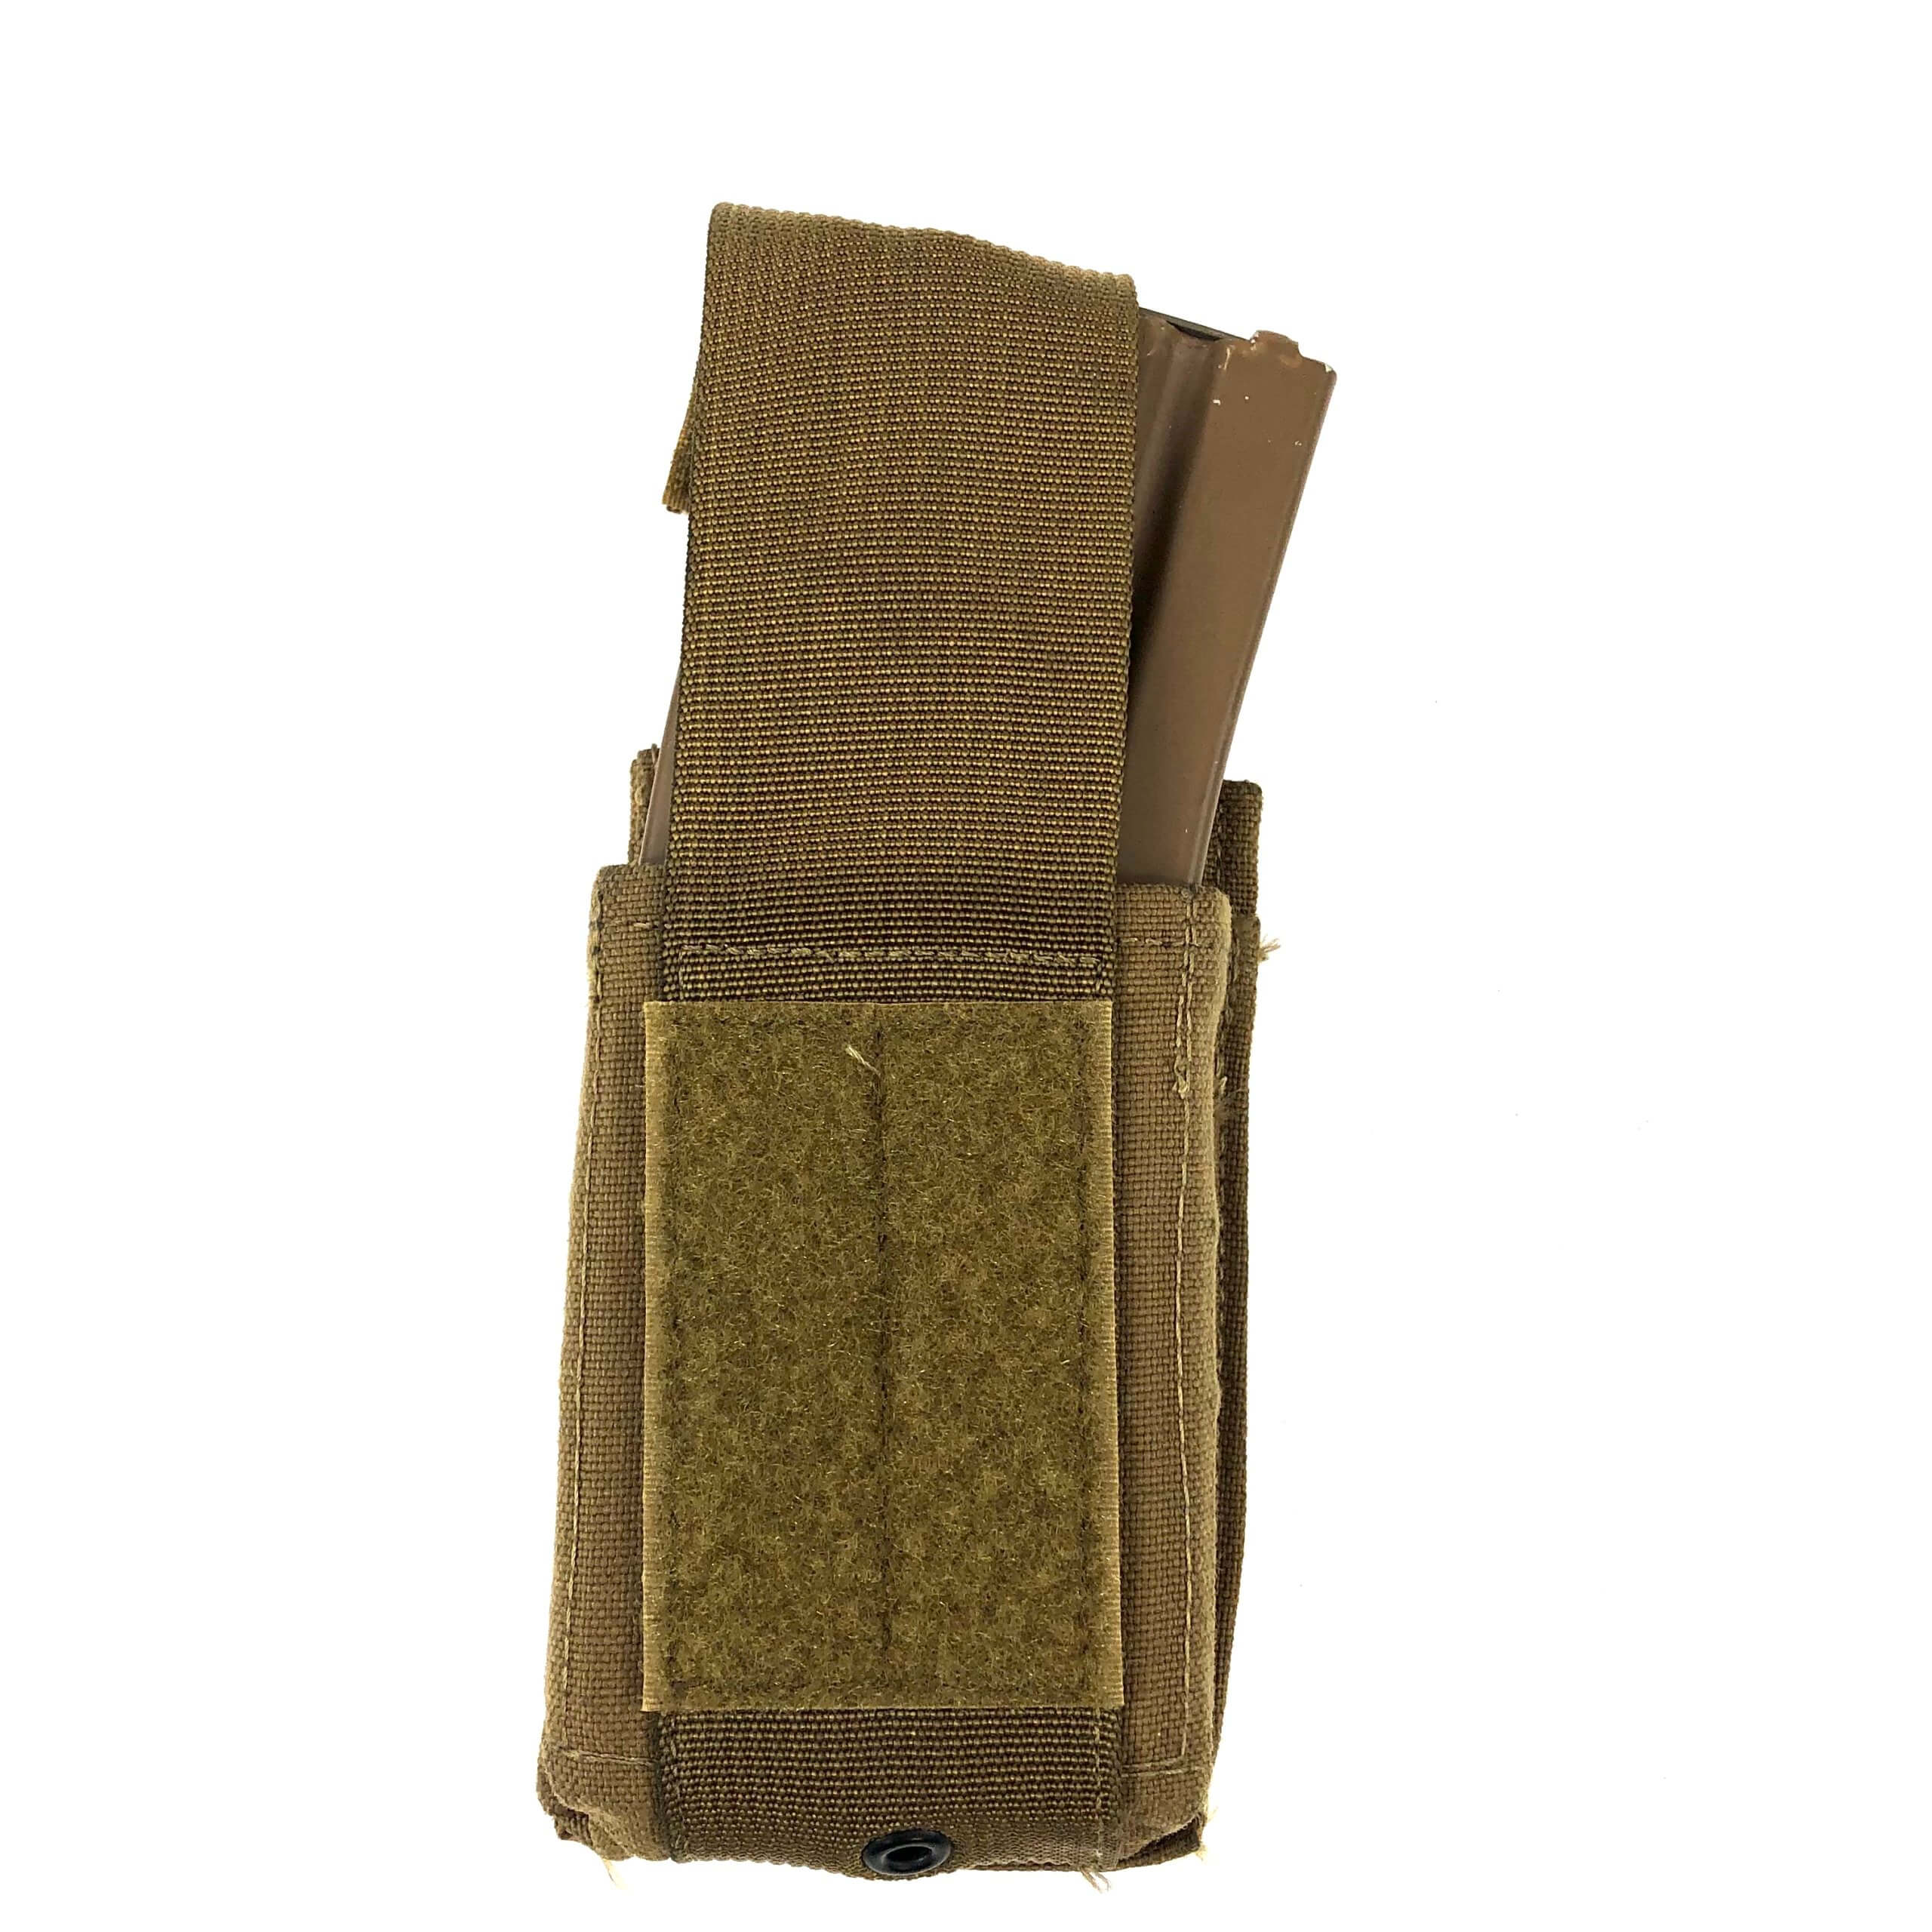 Details about   SET OF 2 NEW US Military USMC SPEED RELOAD MAGAZINE Mag POUCH Coyote Brown NIB 